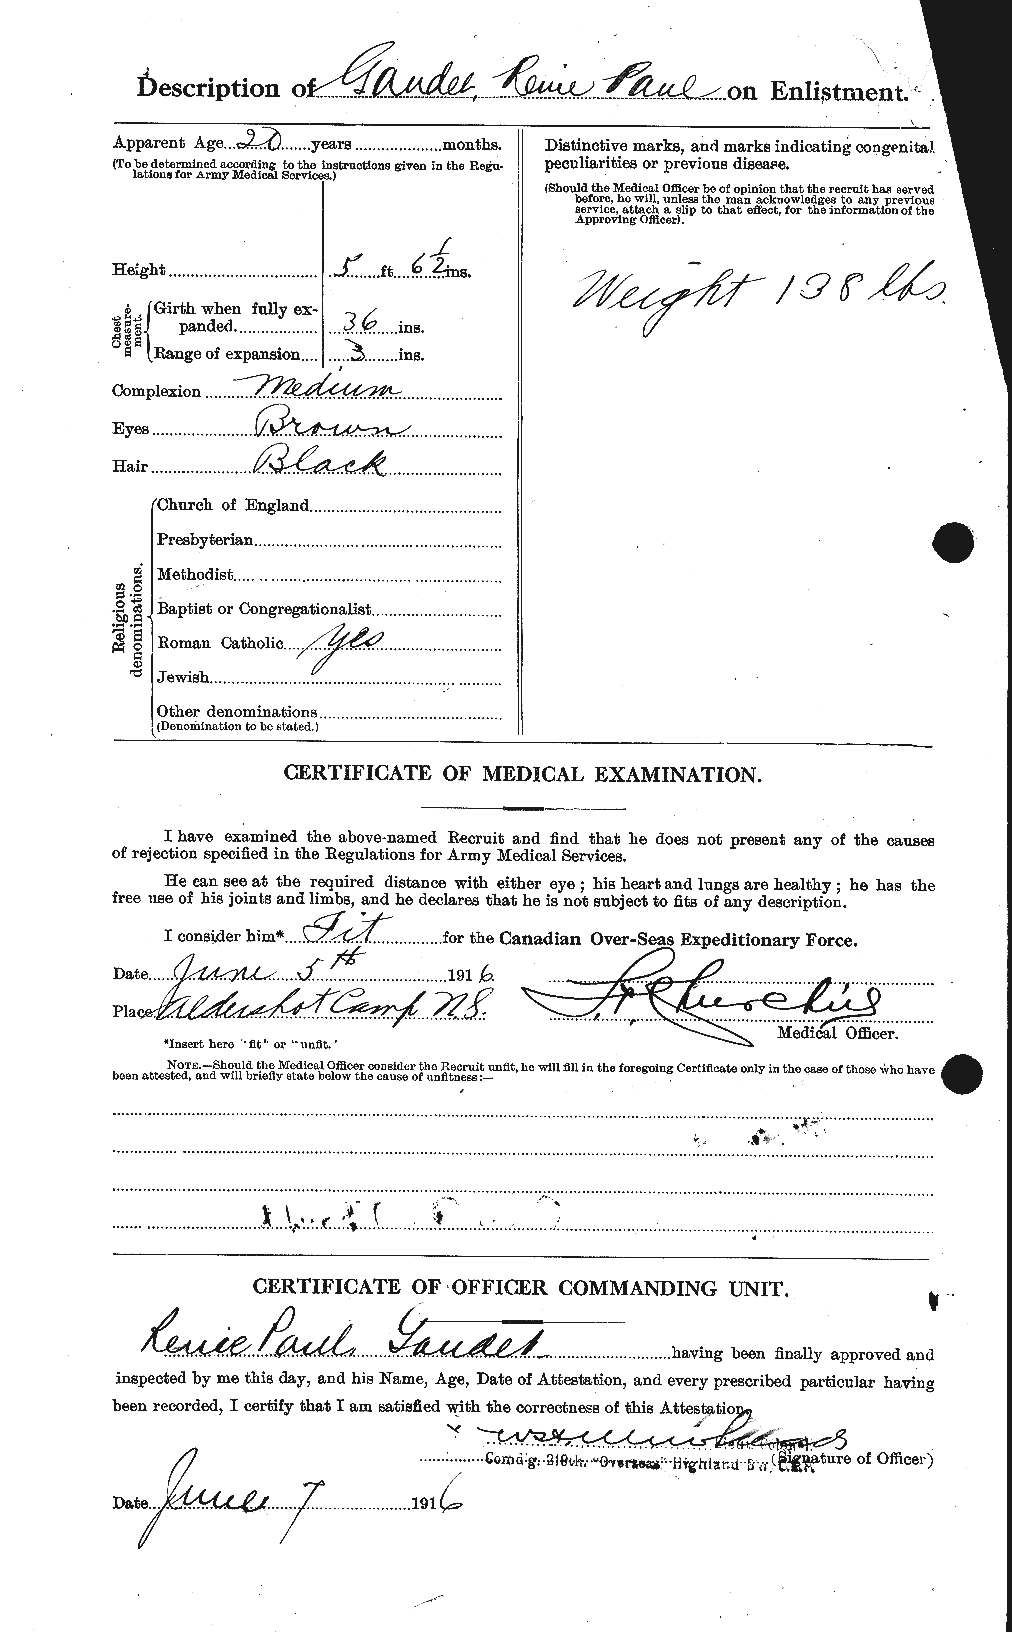 Personnel Records of the First World War - CEF 343120b